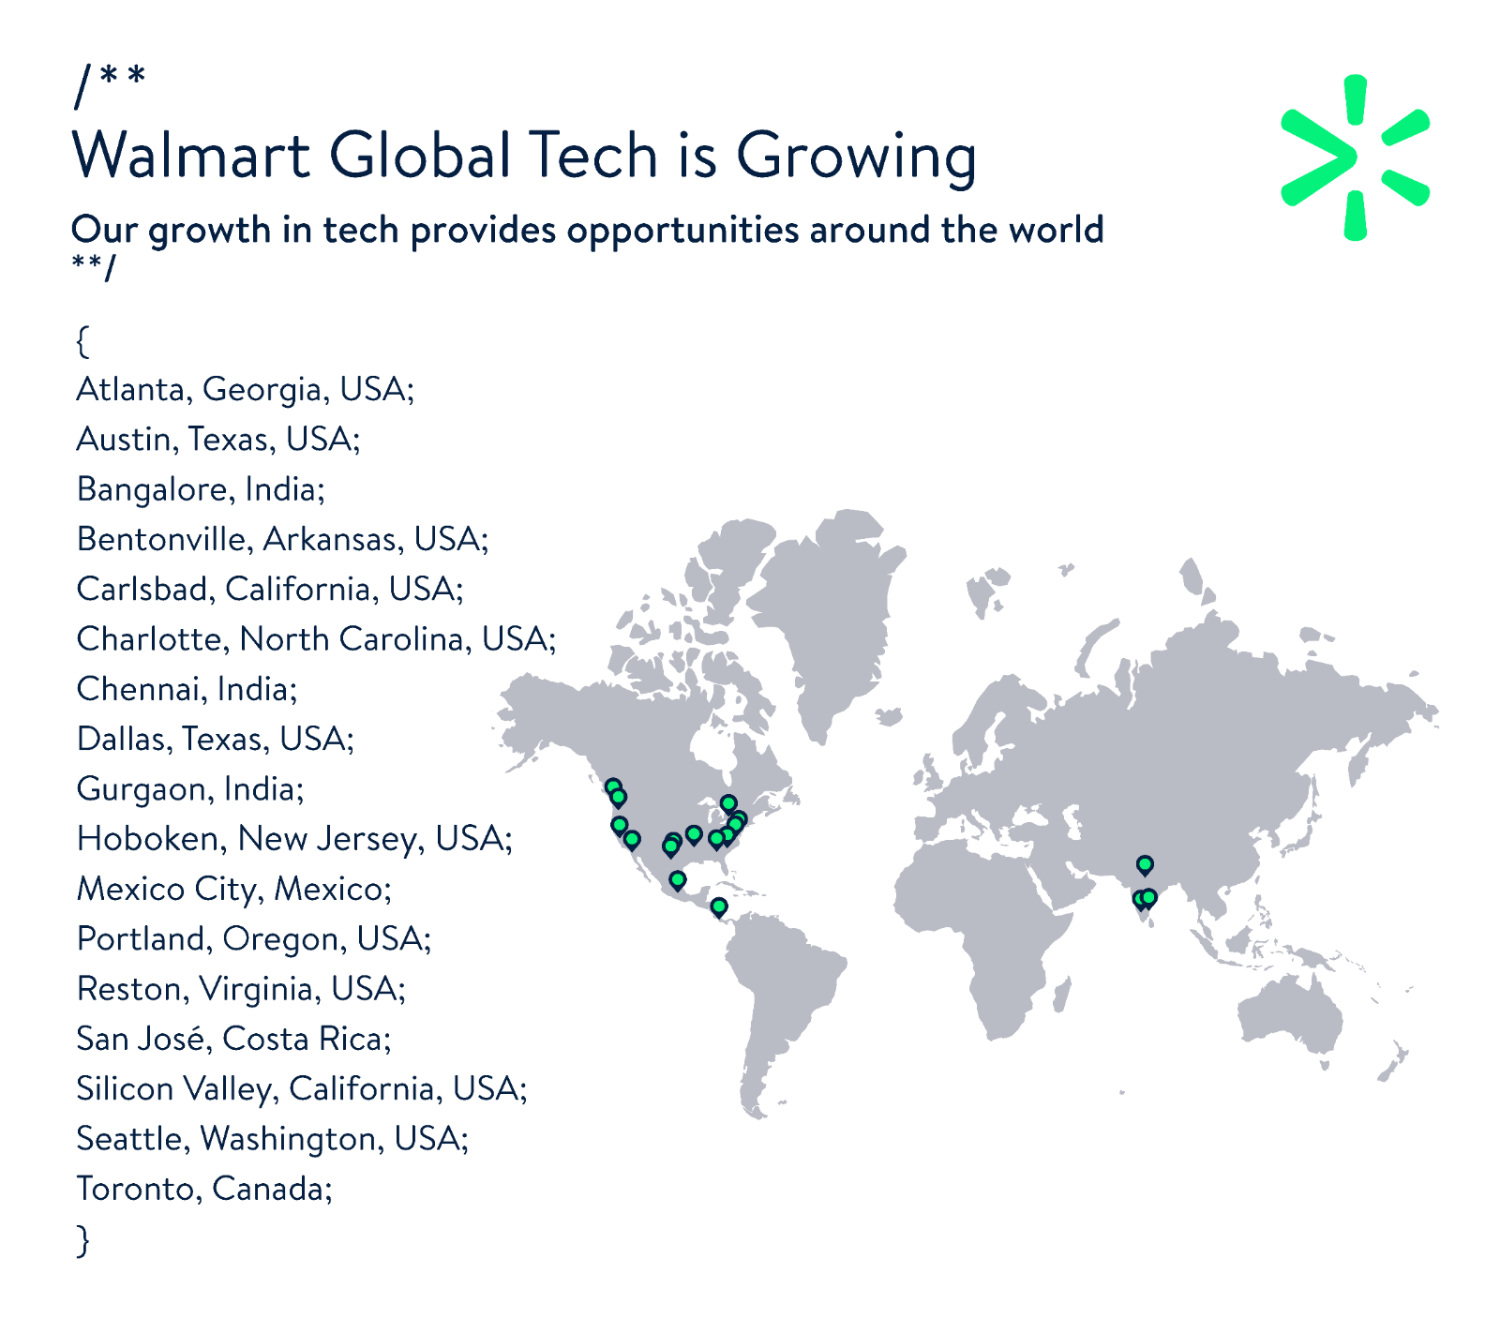 Walmart Global Tech Accelerates Expansion with Plans To Hire Thousands